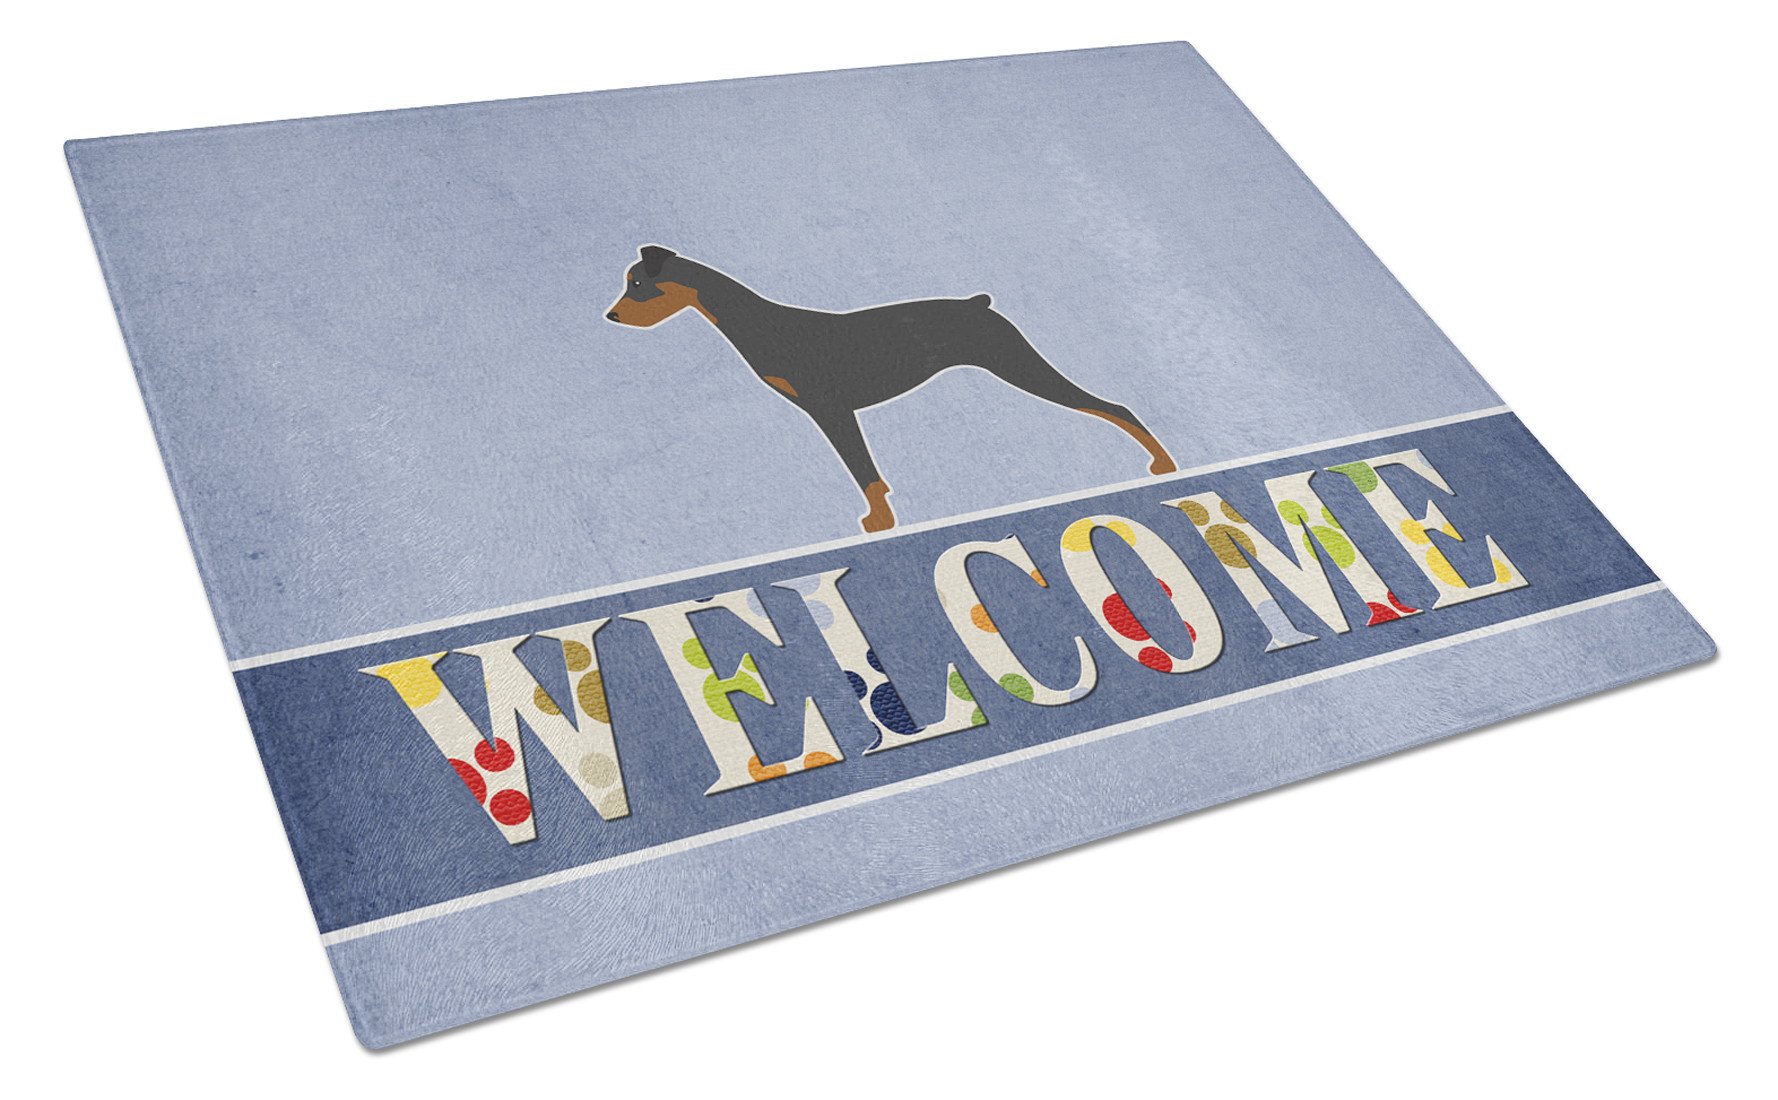 German Pinscher Welcome Glass Cutting Board Large BB5517LCB by Caroline's Treasures